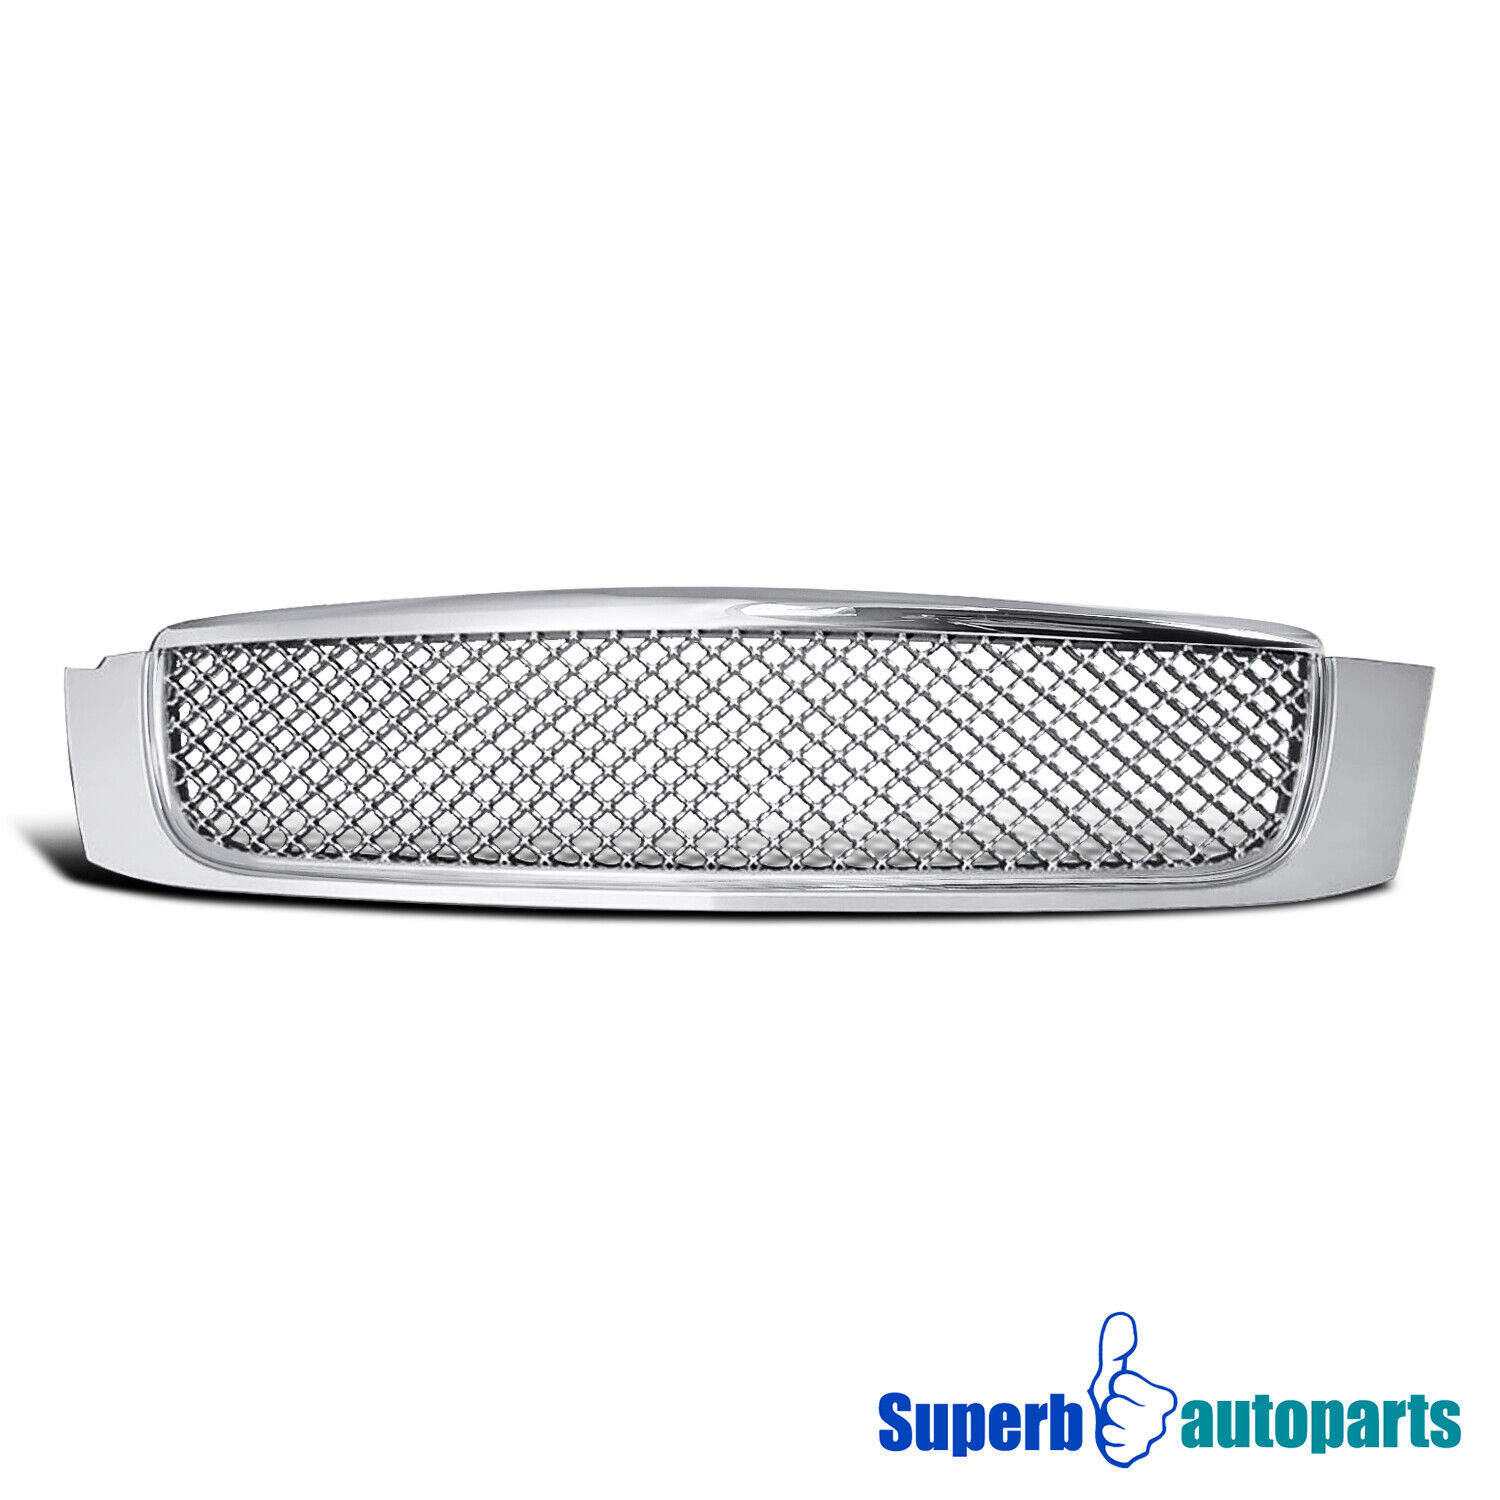 Fits 2000-2005 Cadillac 00-05 DeVille Mesh Style ABS Front Hood Grille